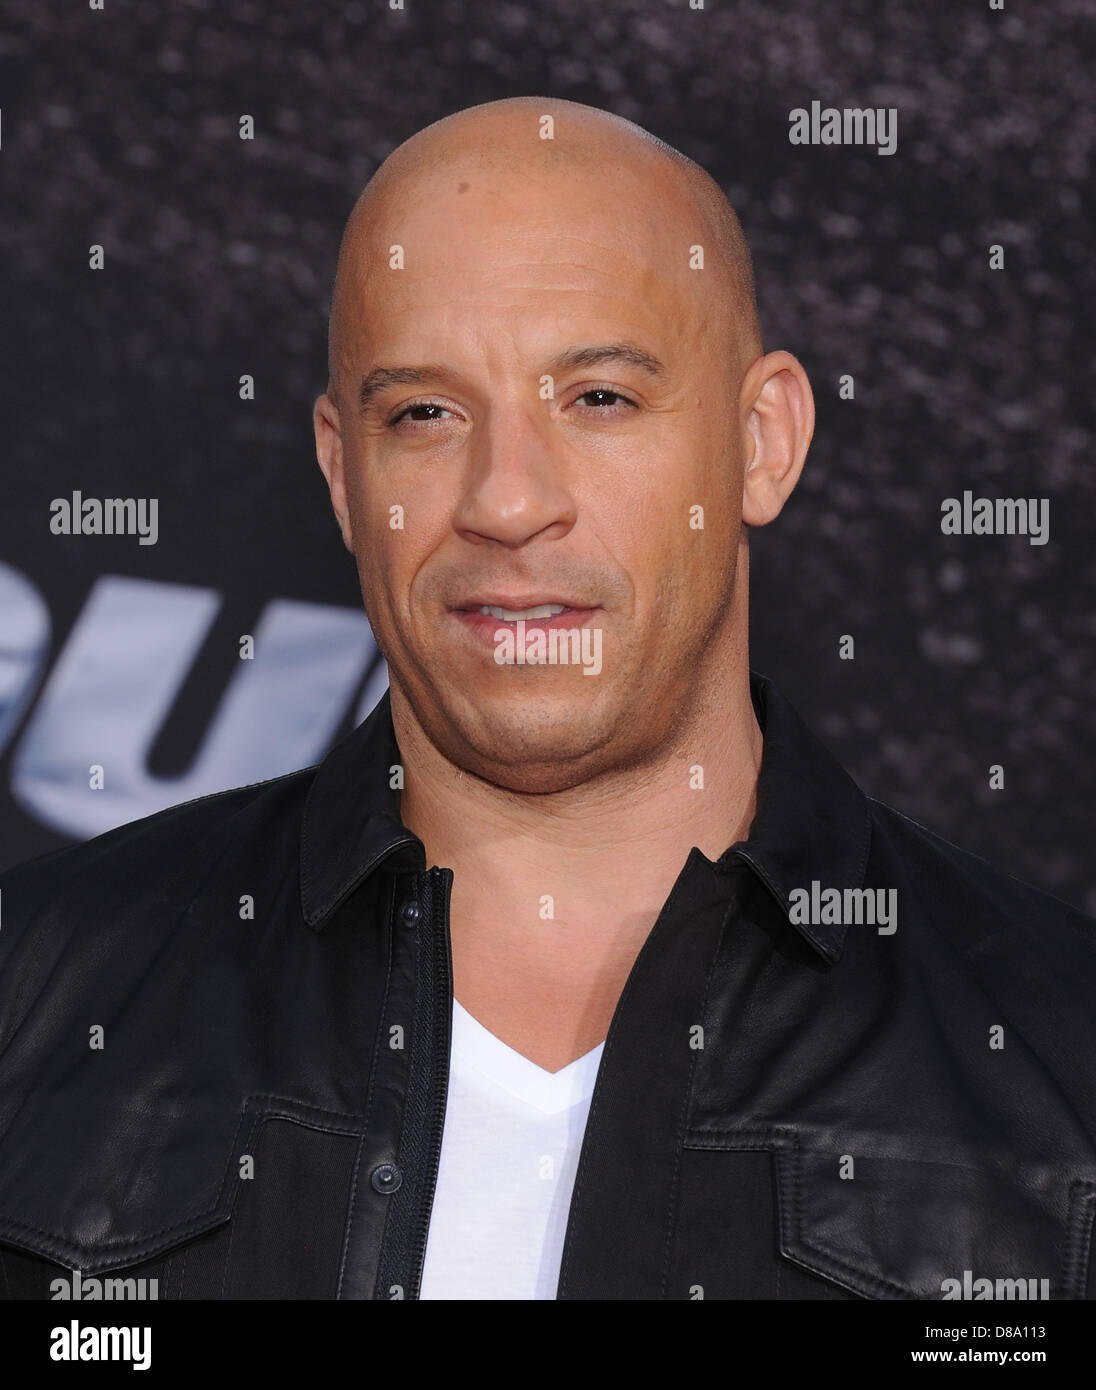 Los Angeles, California, USA. 21st May 2013. Vin Diesel arrives for the premiere of the film 'Fast & Furious 6' at the Gibson Ampitheater. (Credit Image: Credit:  Lisa O'Connor/ZUMAPRESS.com/Alamy Live News) Stock Photo